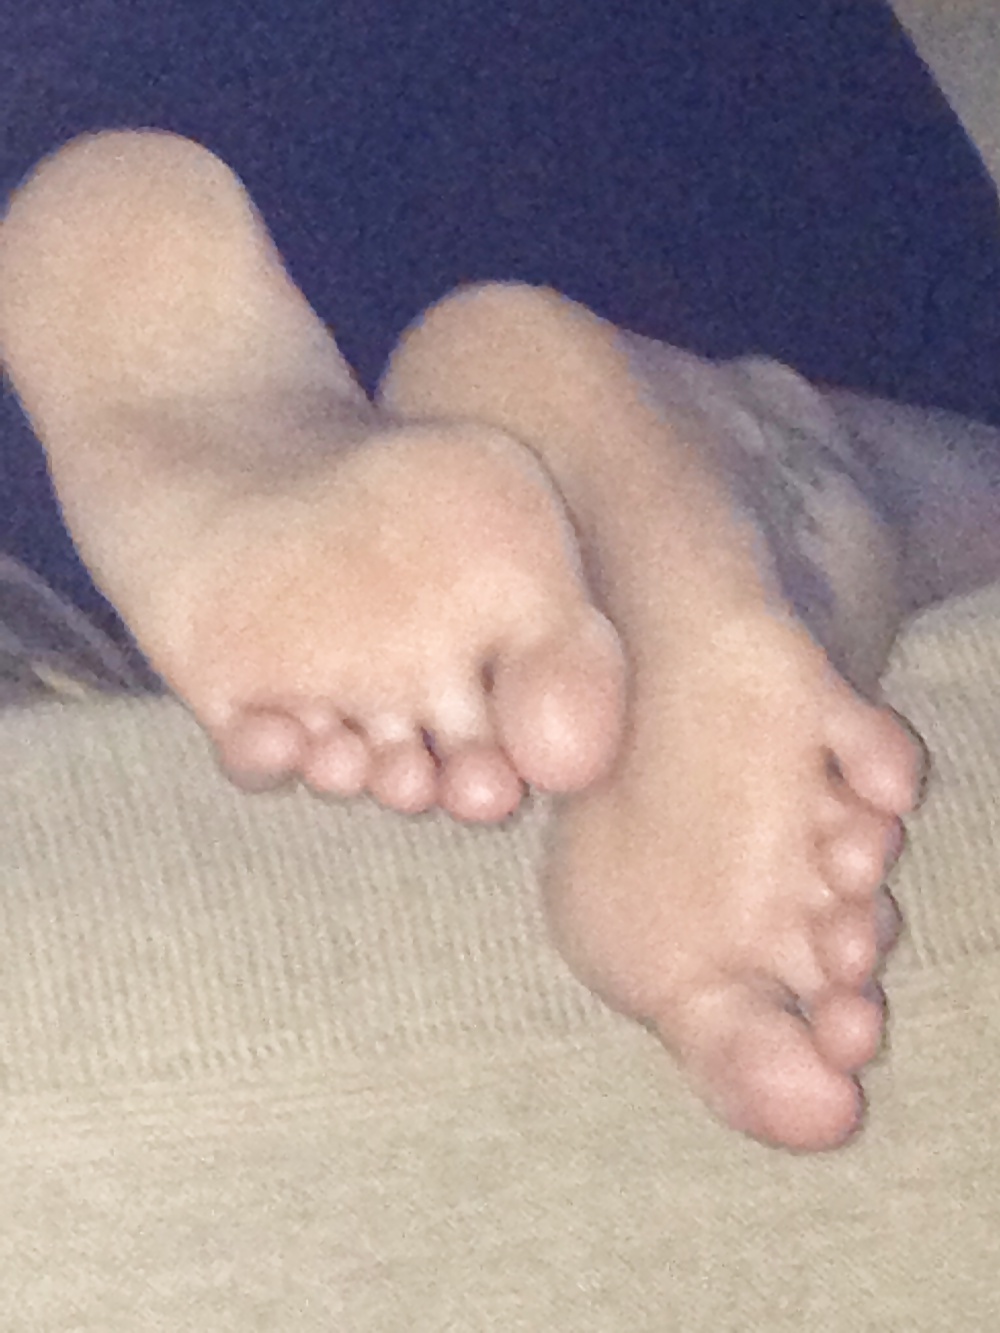 Girlfriends feet and more #29538276